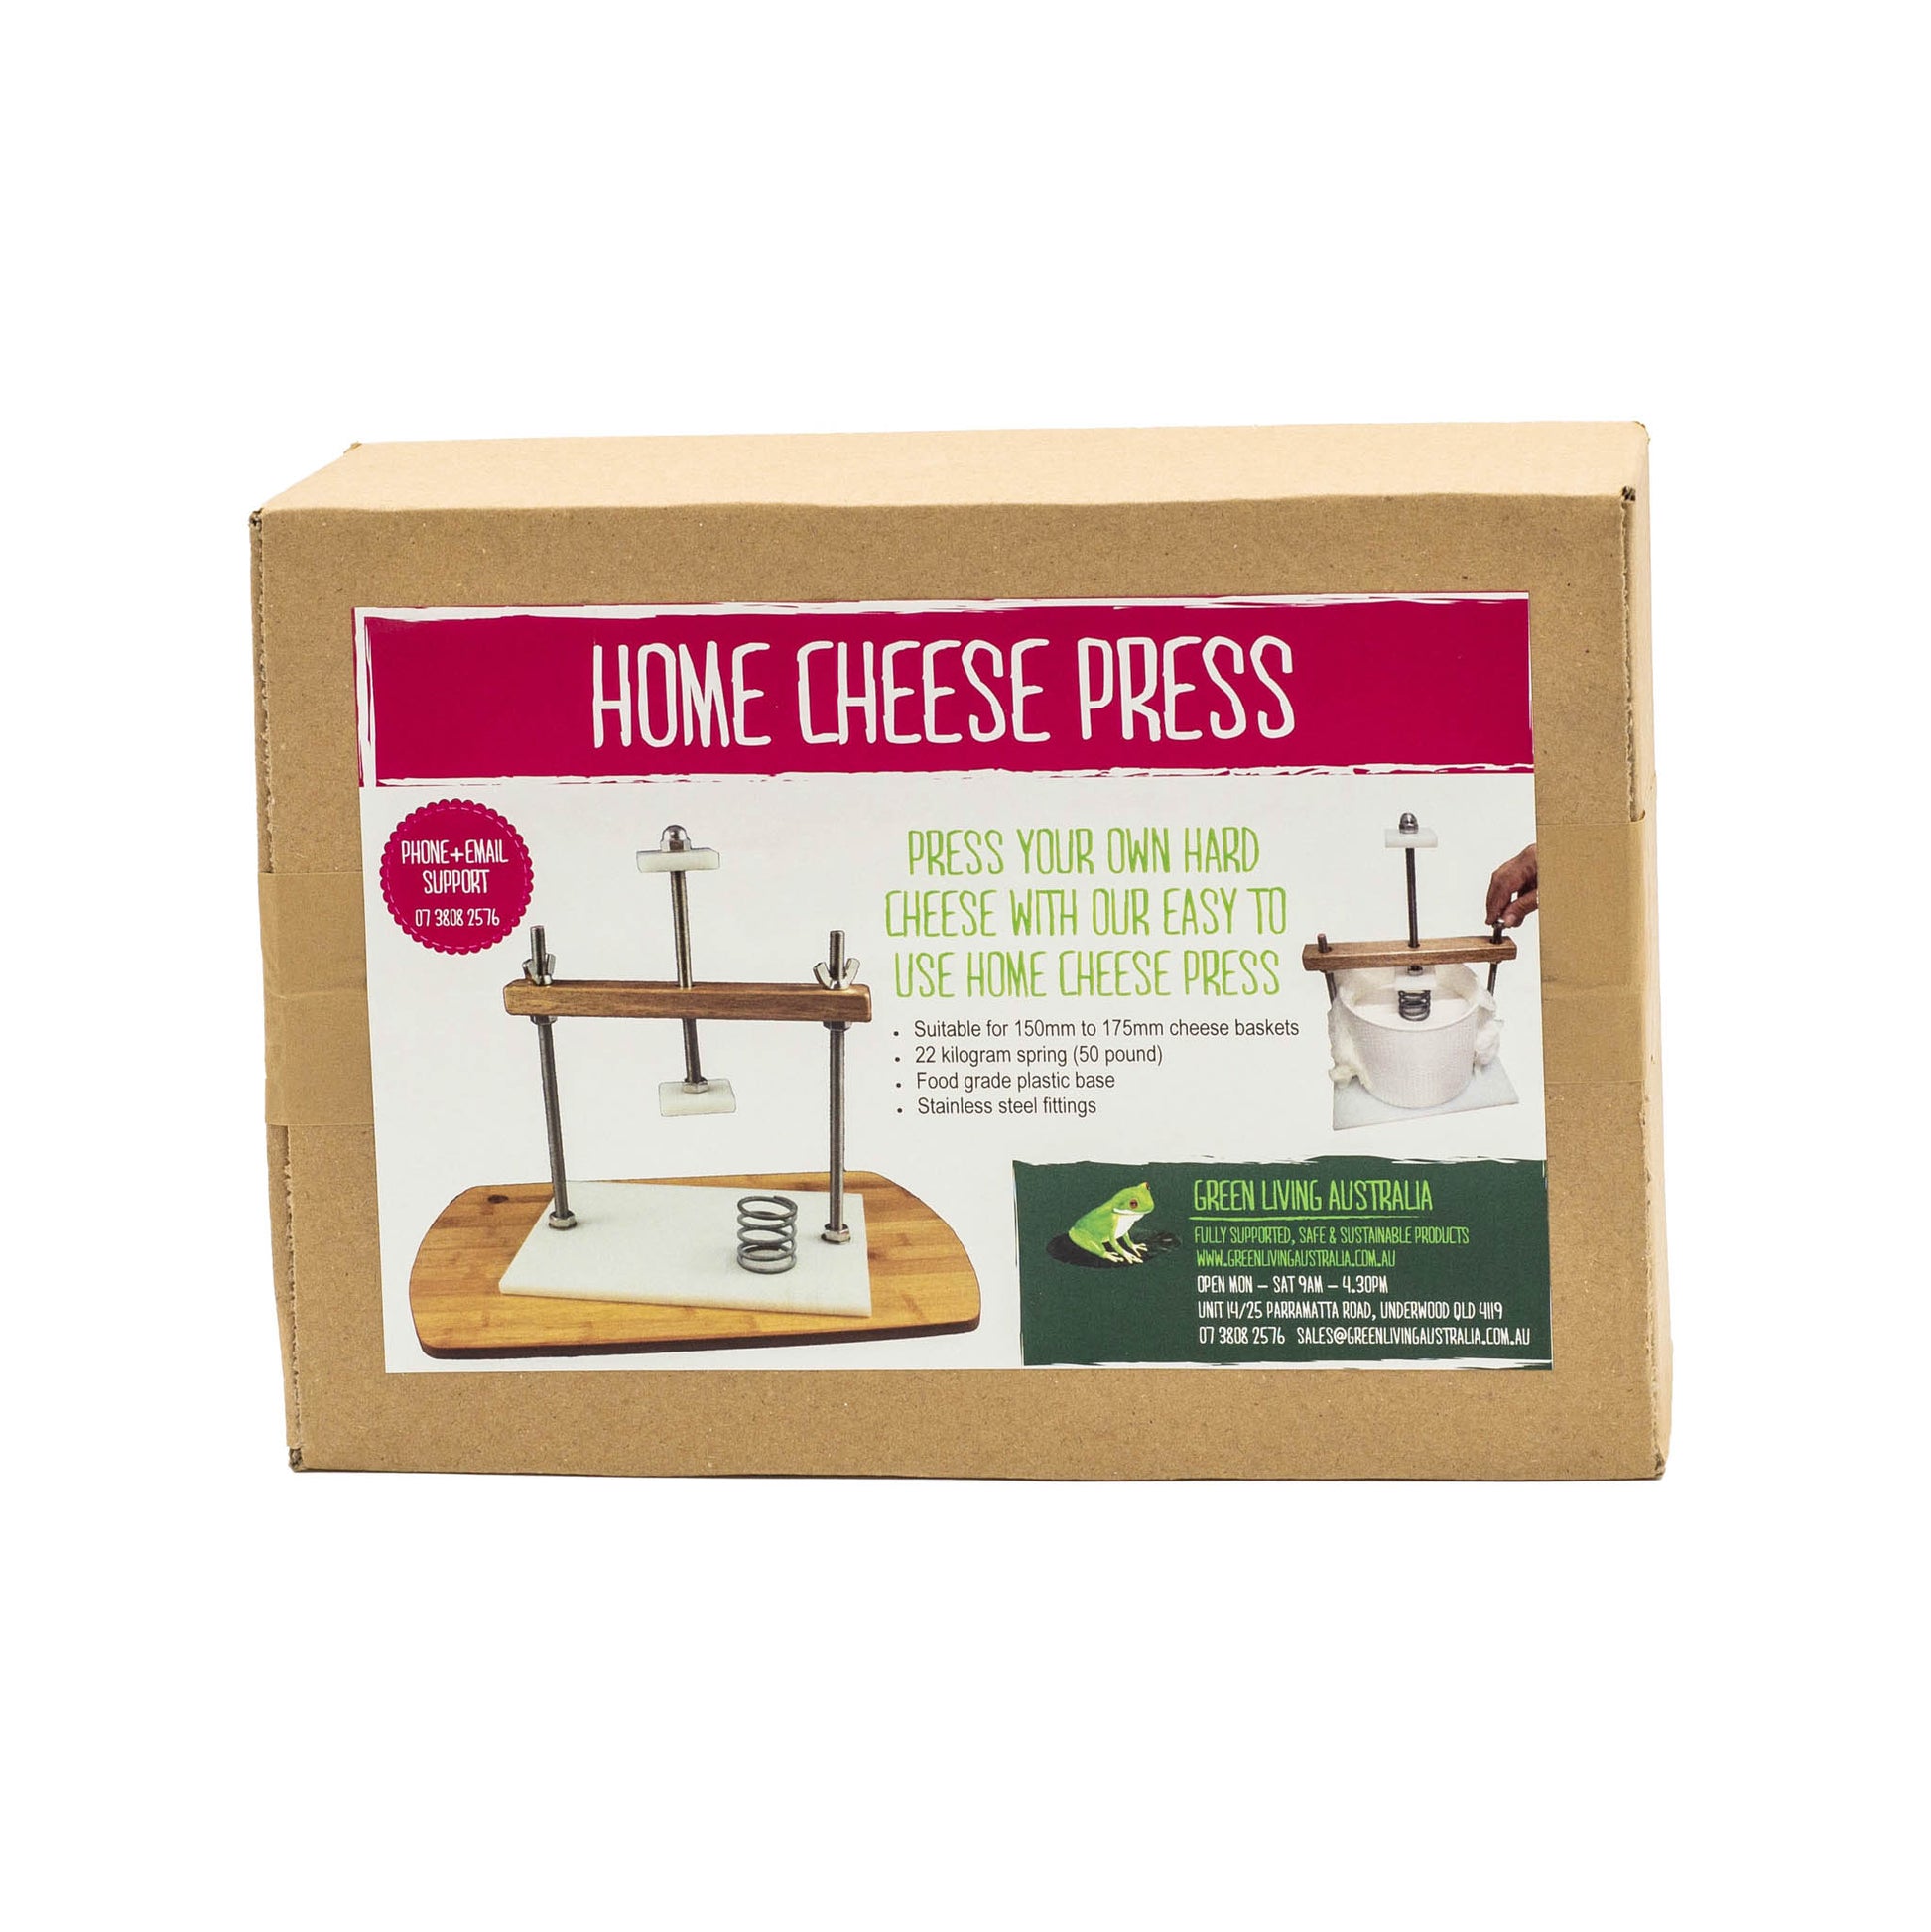 Press your own hard cheese with our easy to use home cheese press. Suitable for 150mm to 175mm cheese baskets